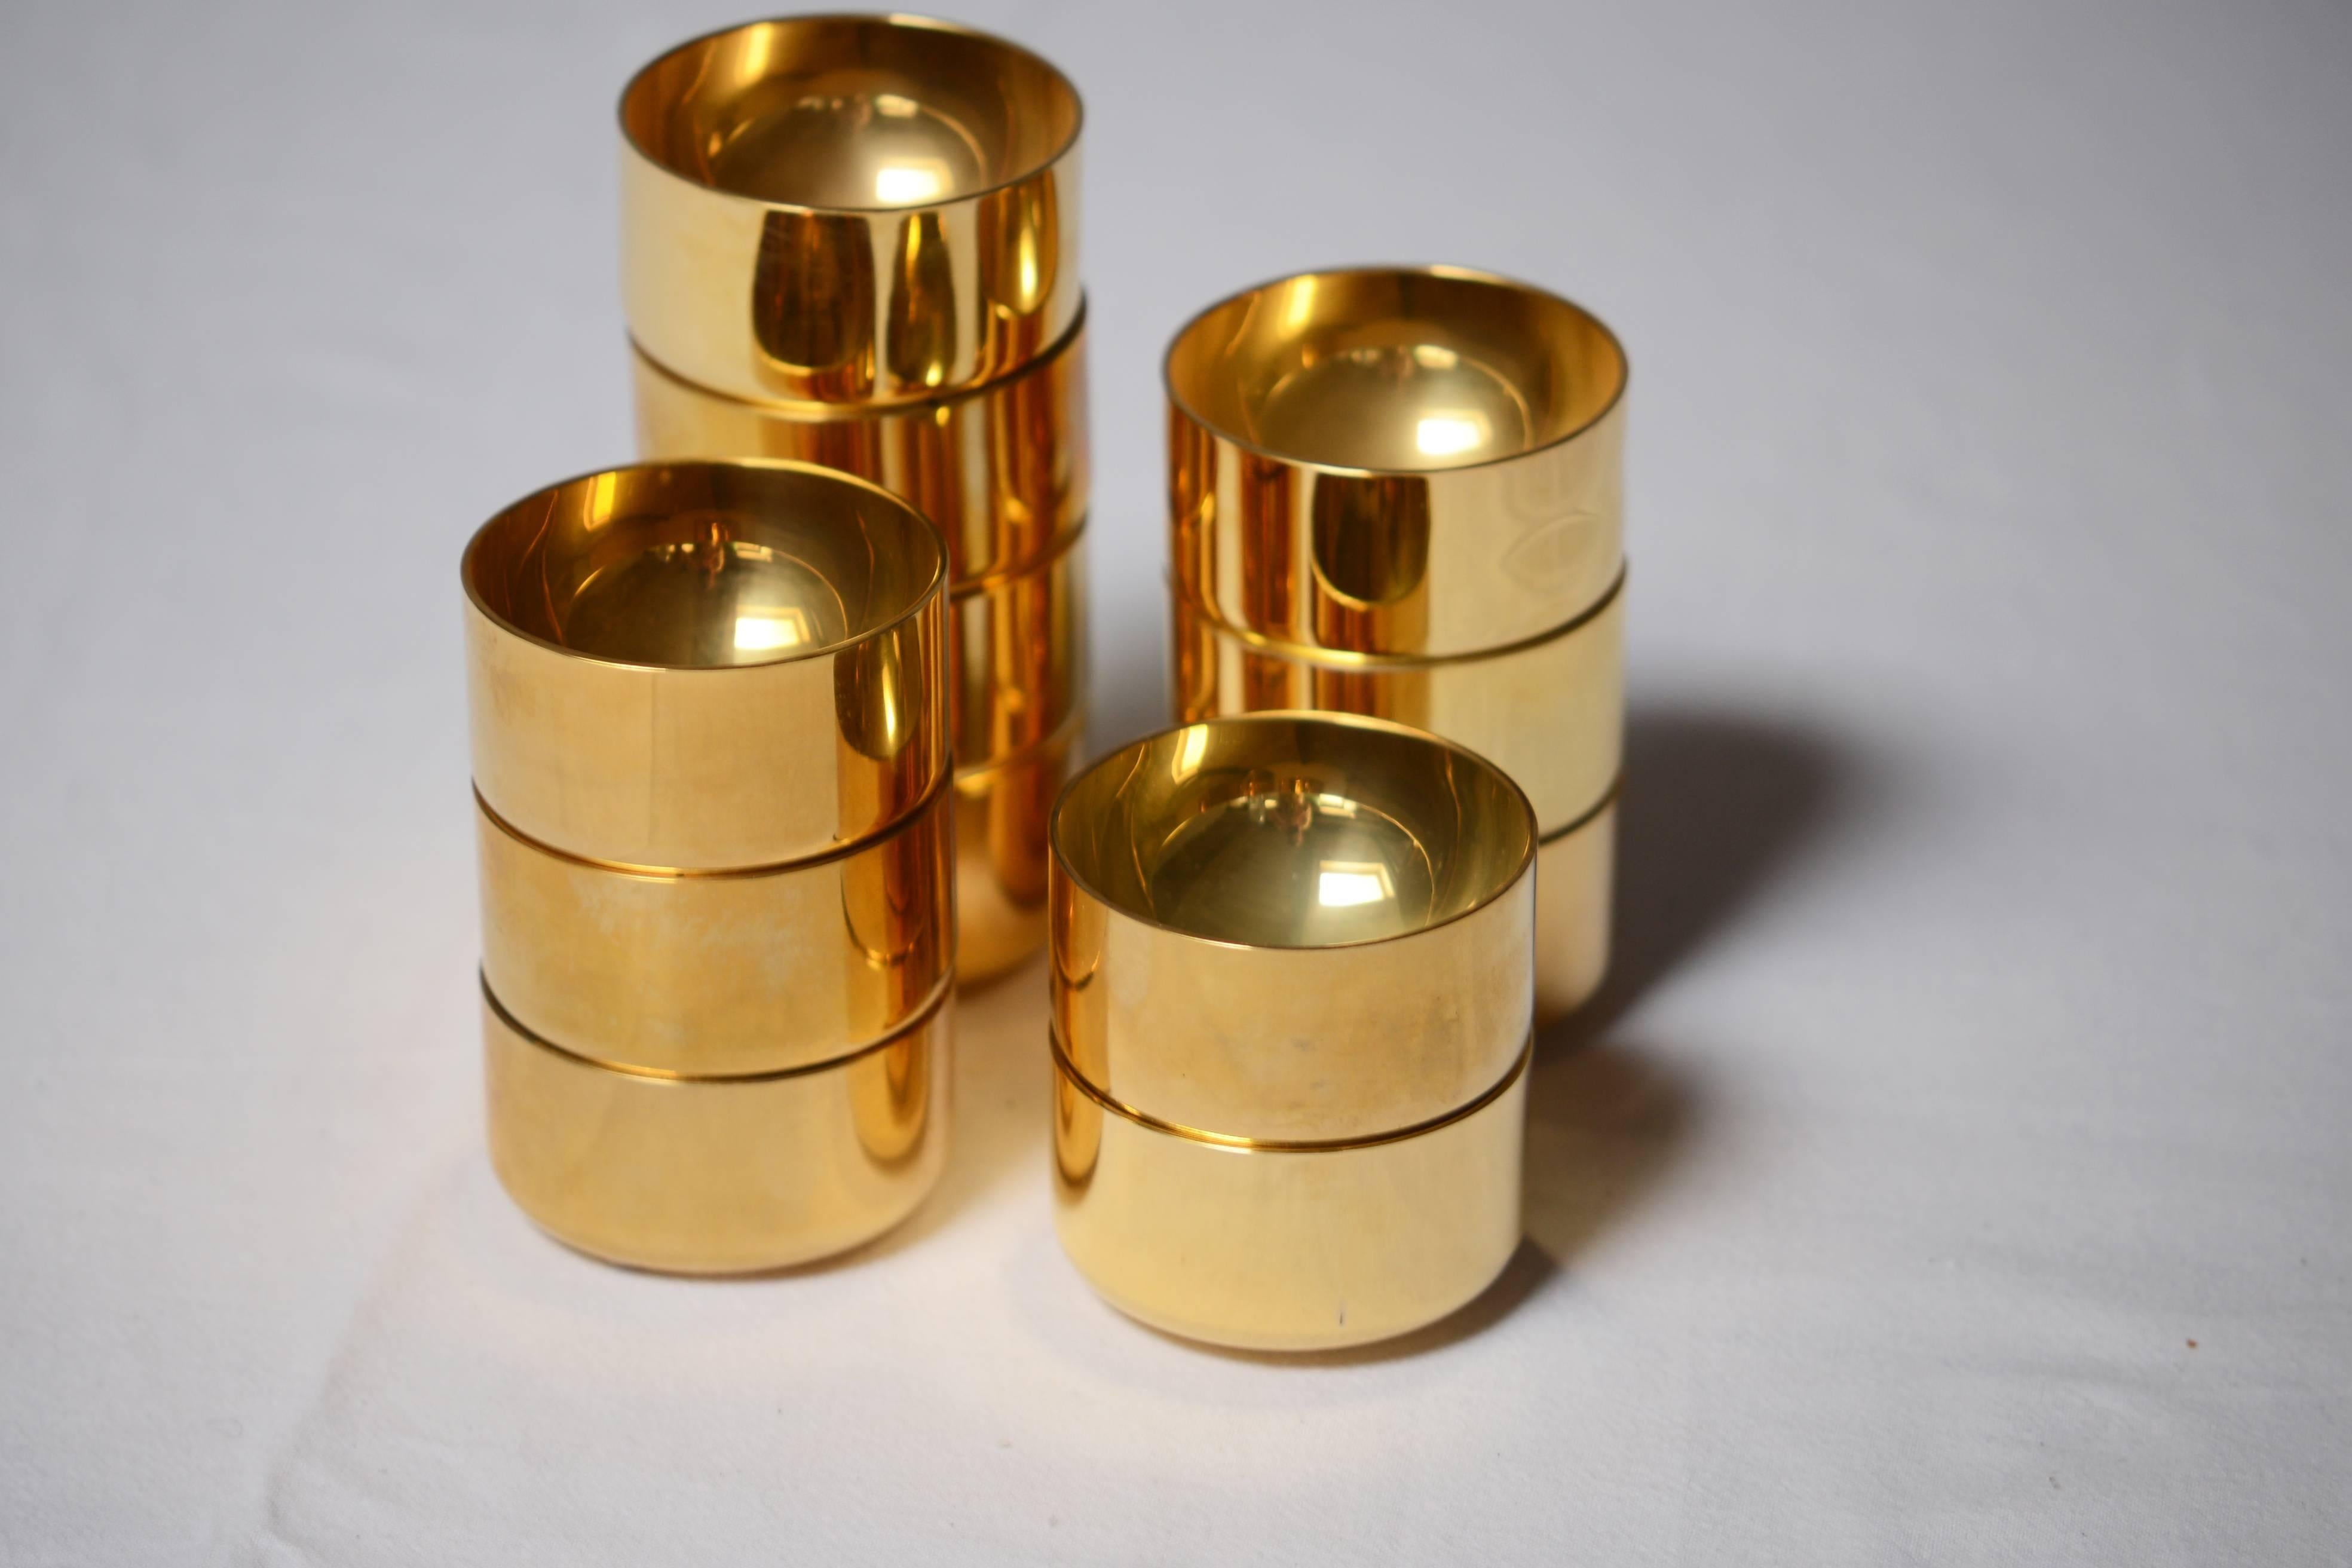 Mid-20th Century Pierre Forssell 12 Gold-Plated Alcohol Tasters, Made by Skultuna, Sweden For Sale